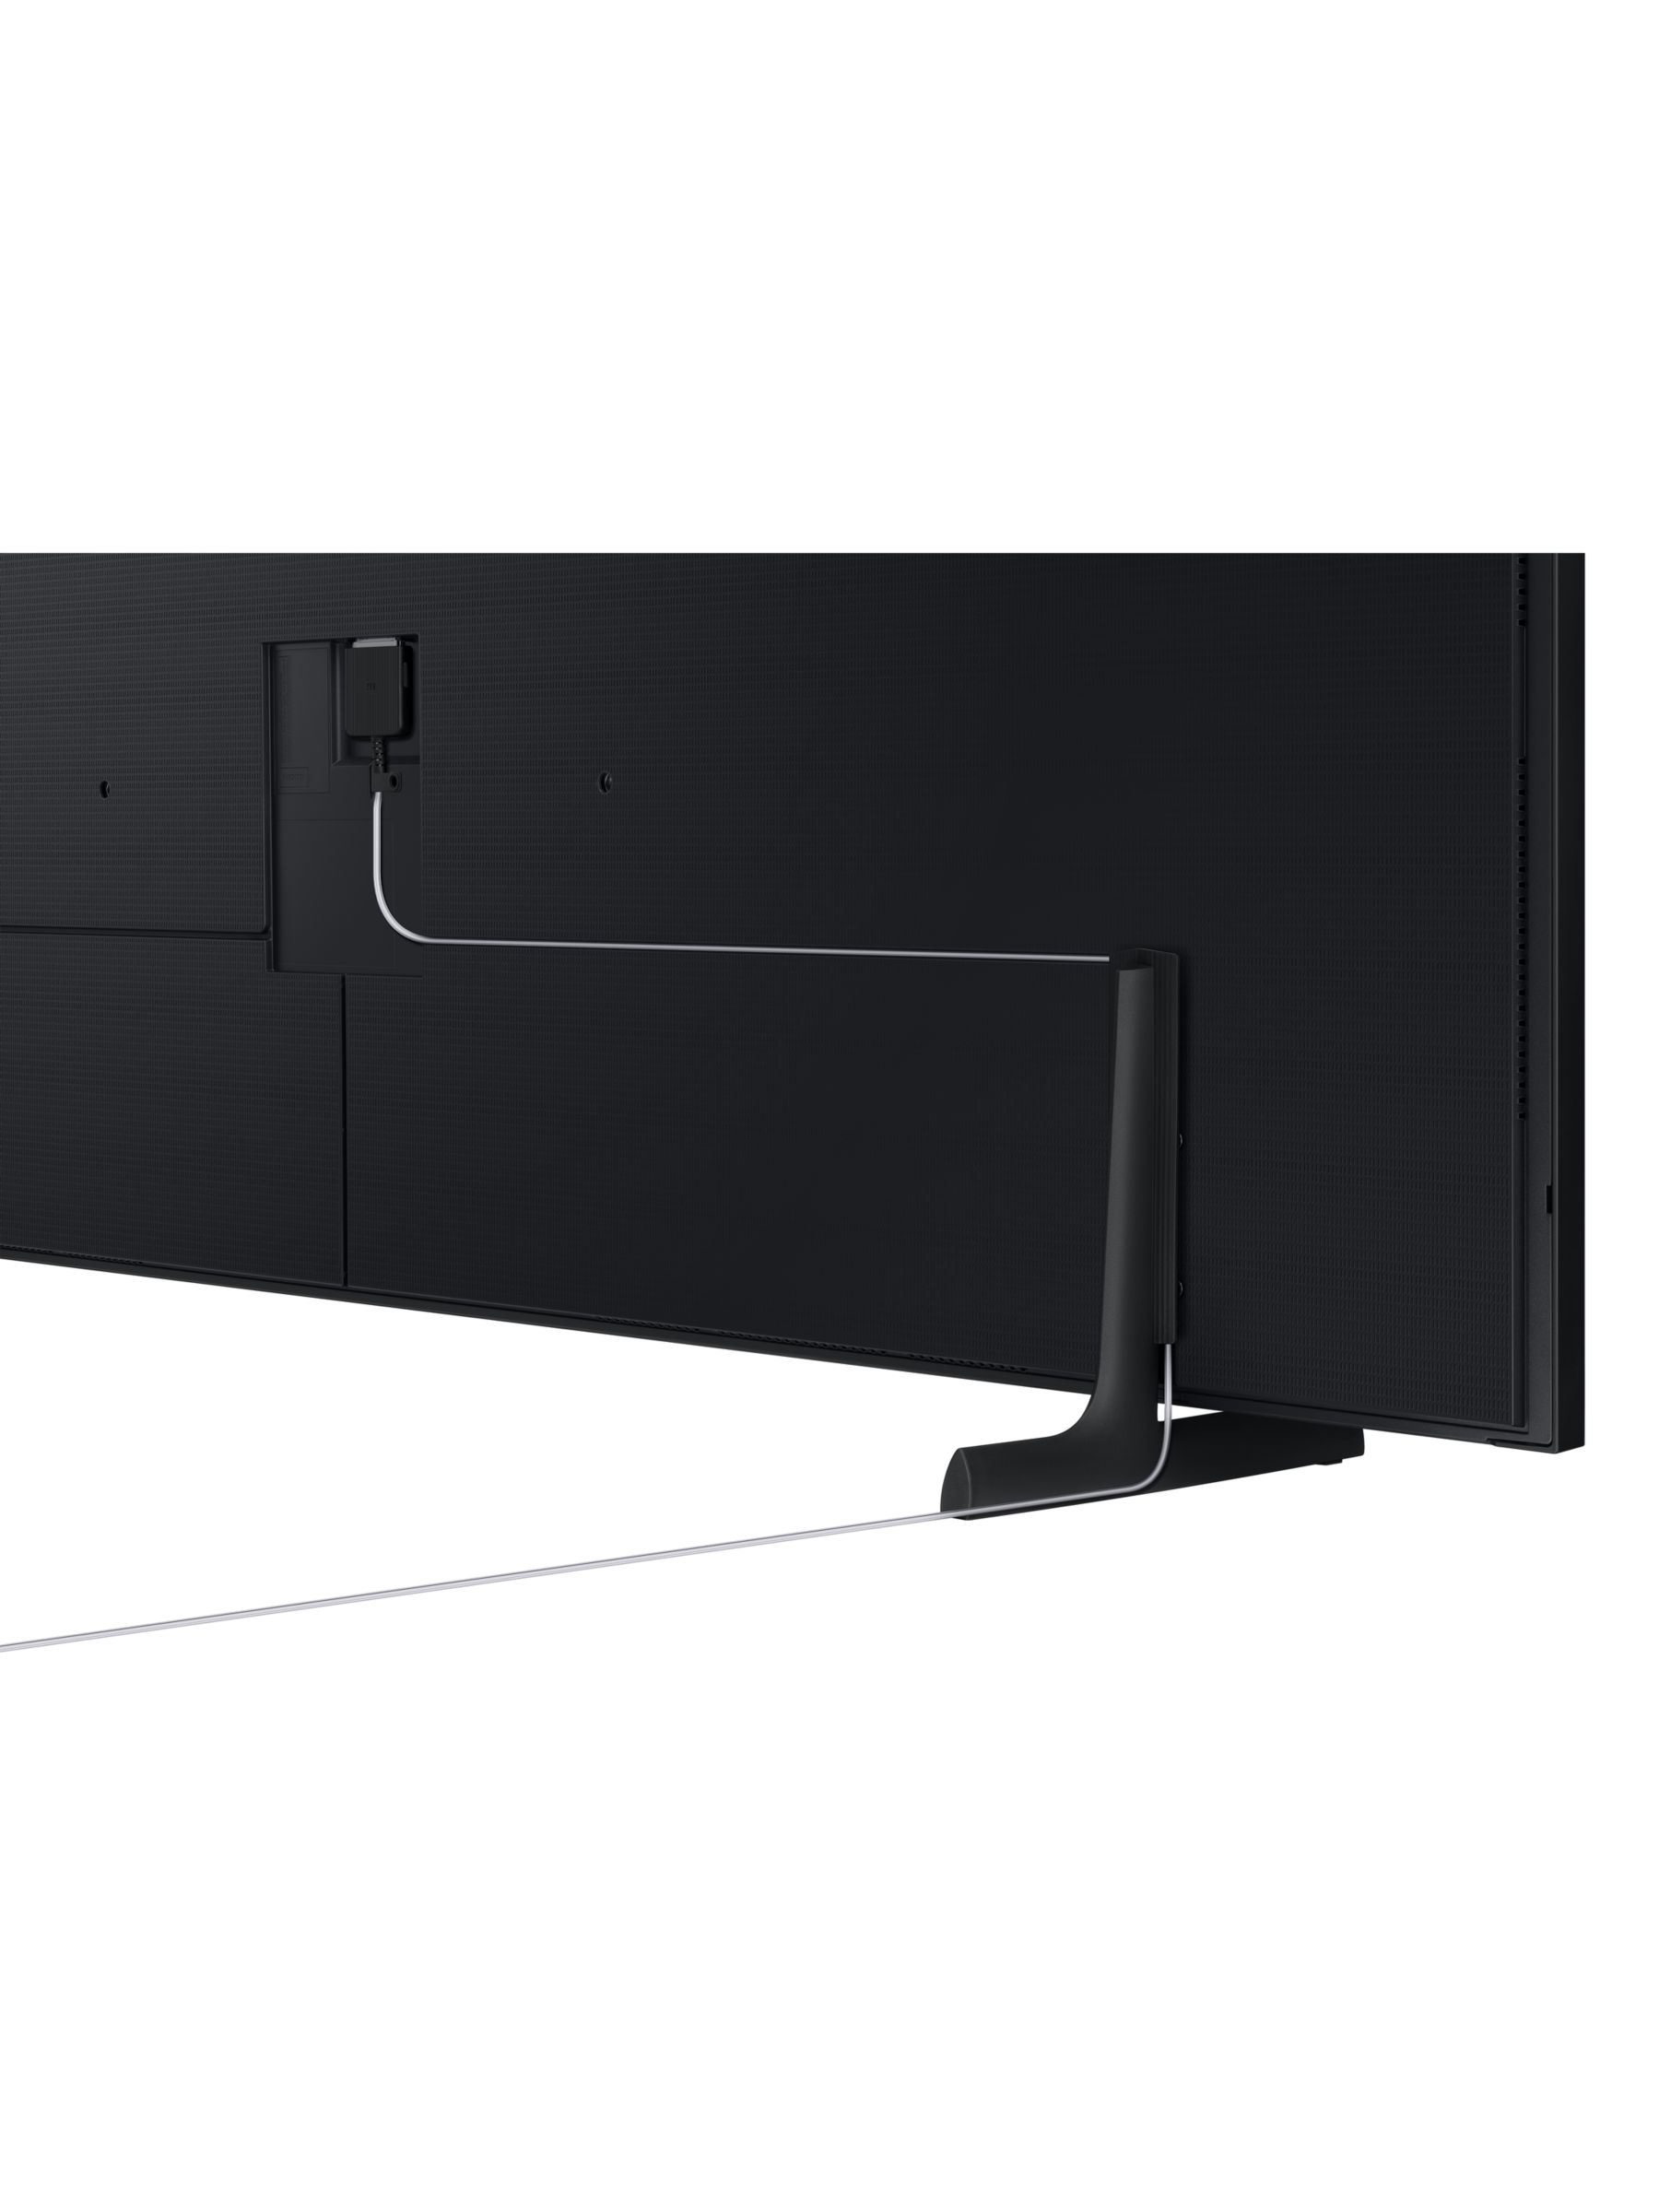 Samsung The Frame 21 Qled Art Mode Tv With Slim Fit Wall Mount 55 Inch